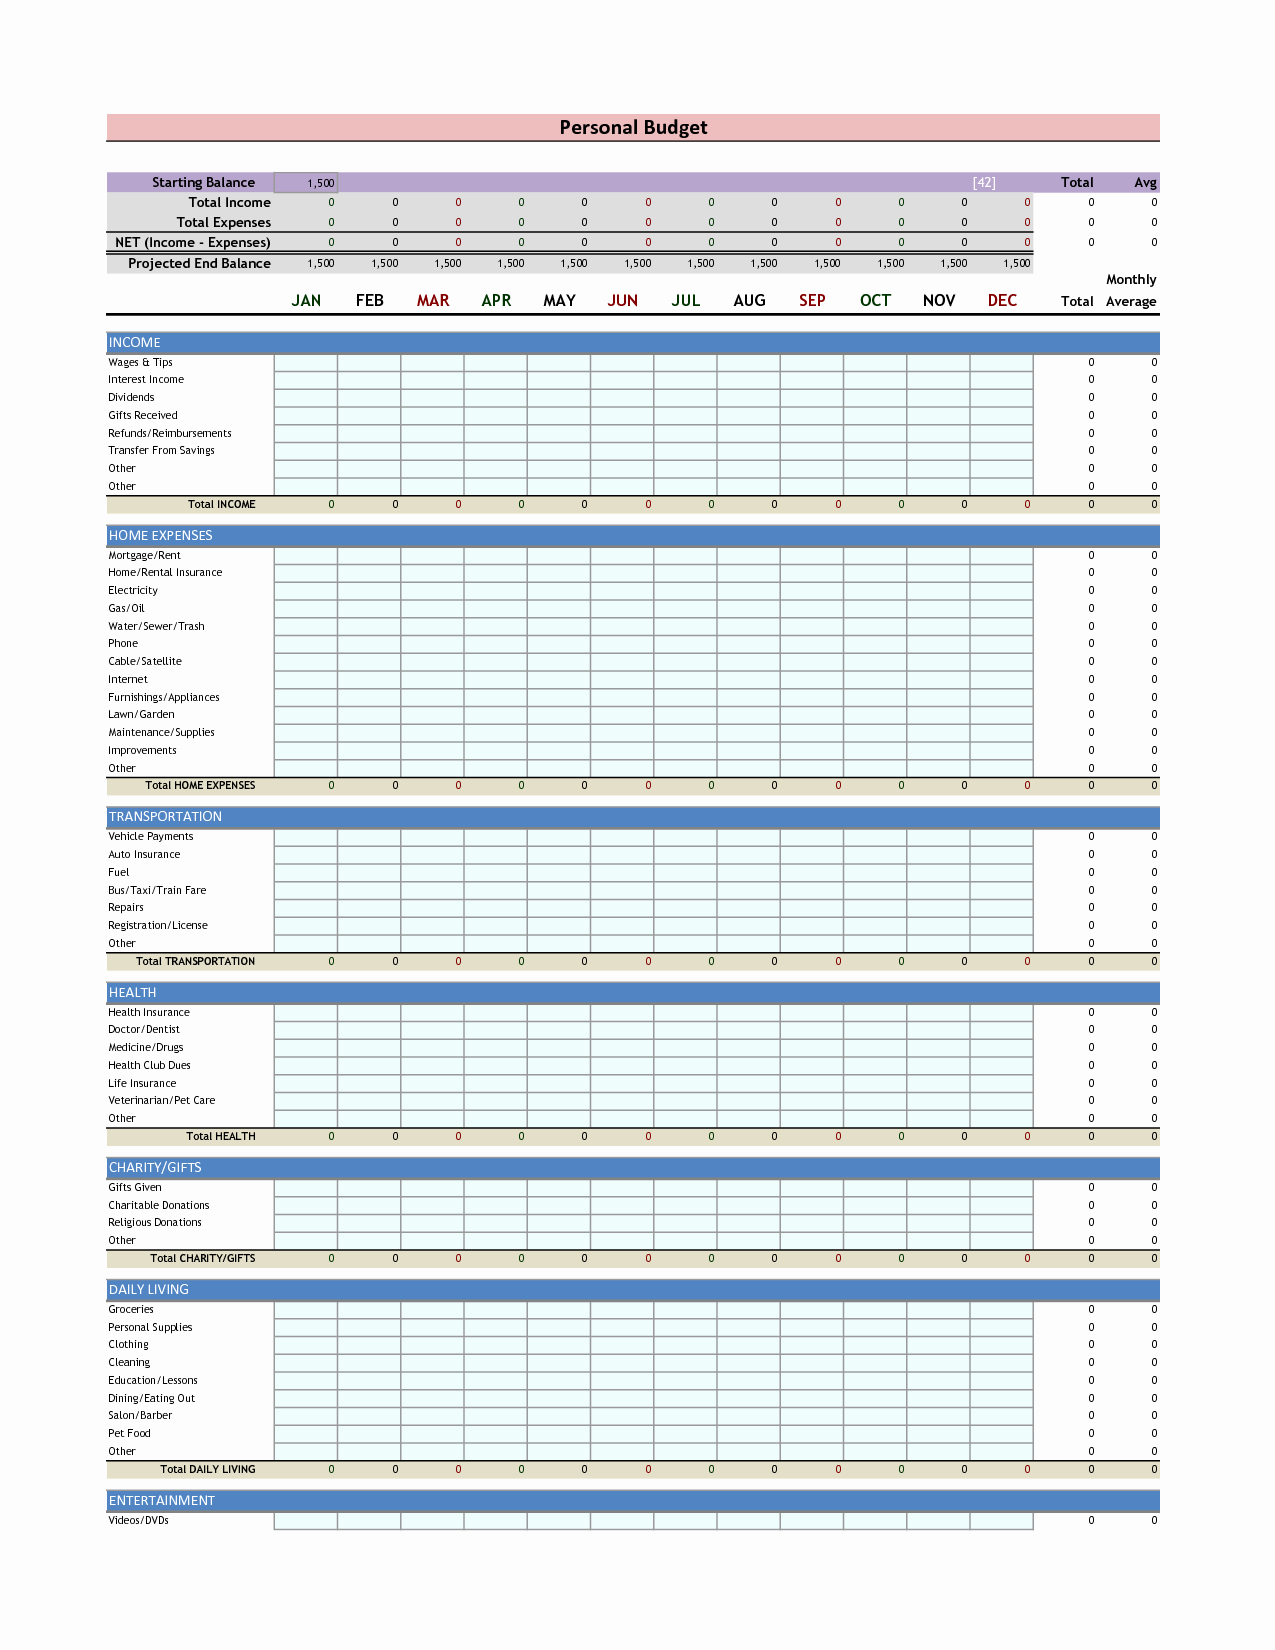 Monthly Budget Excel Spreadsheet Template Fresh Personal Bud Excel Template Free Excel Bud